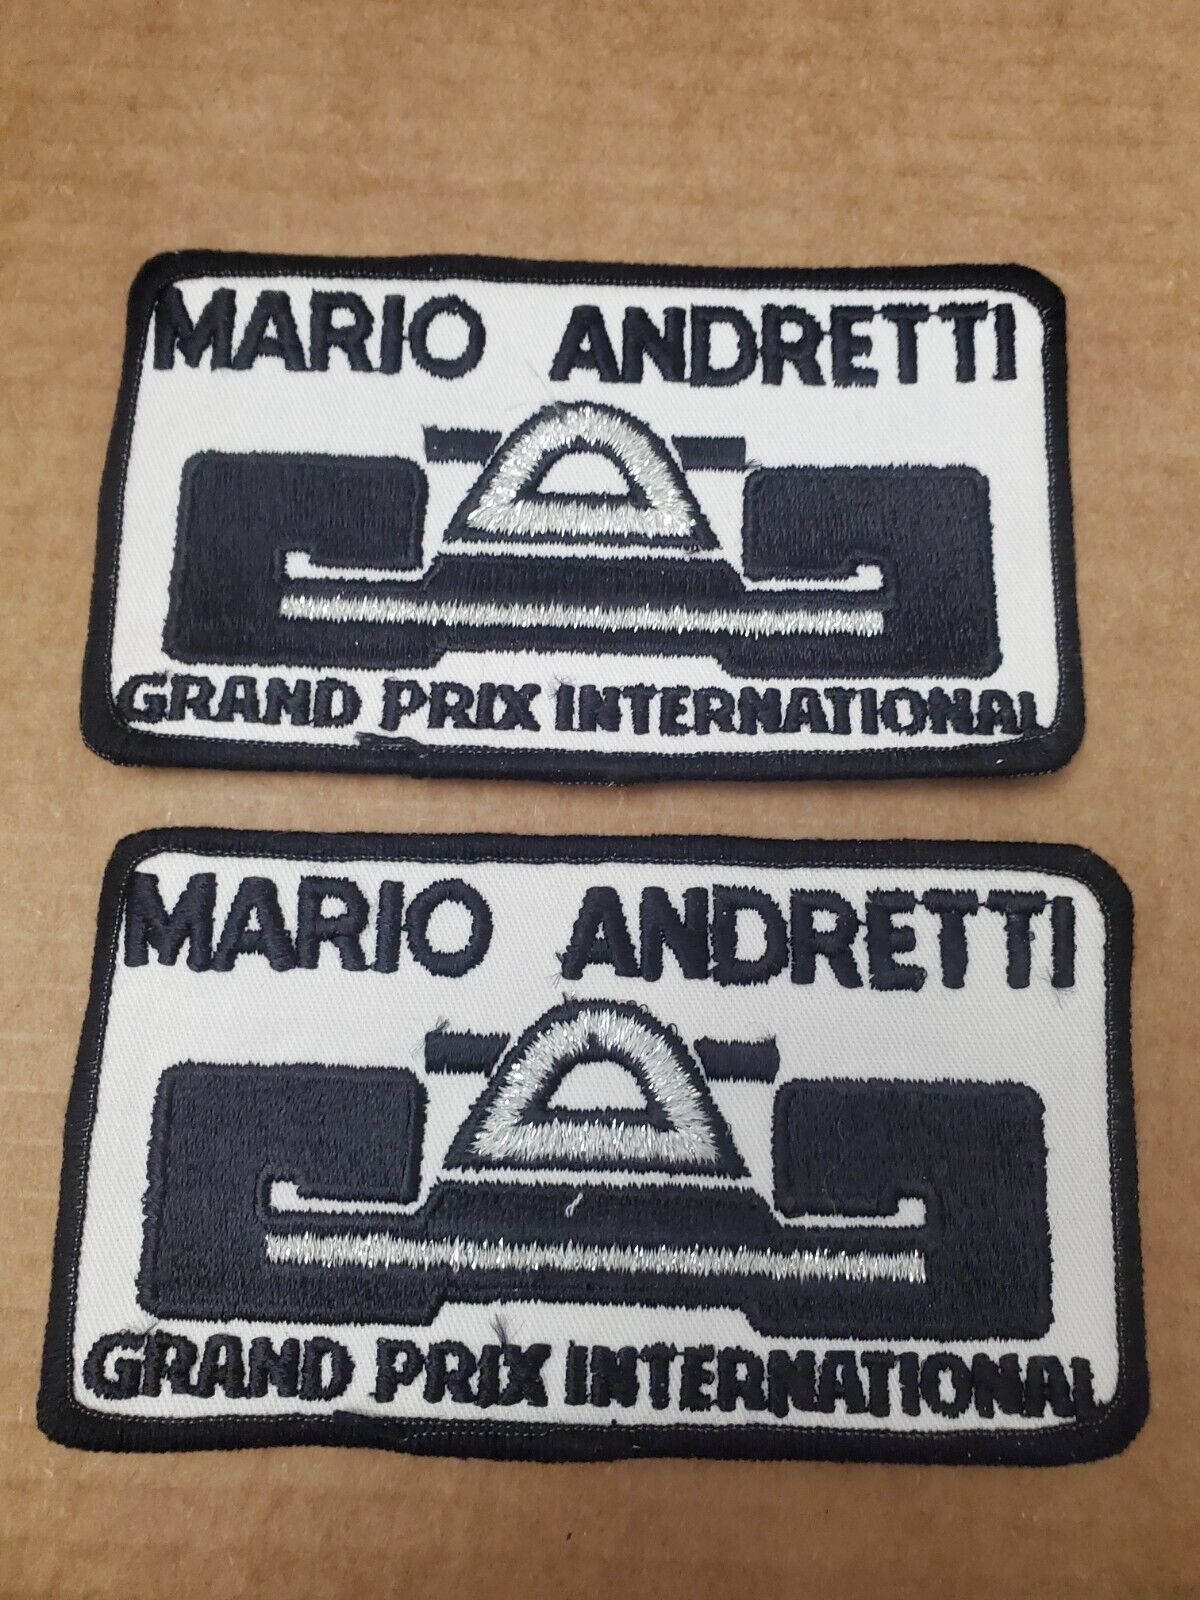 Lot of 2 Vintage Mario Andretti Grand Prix International Patches